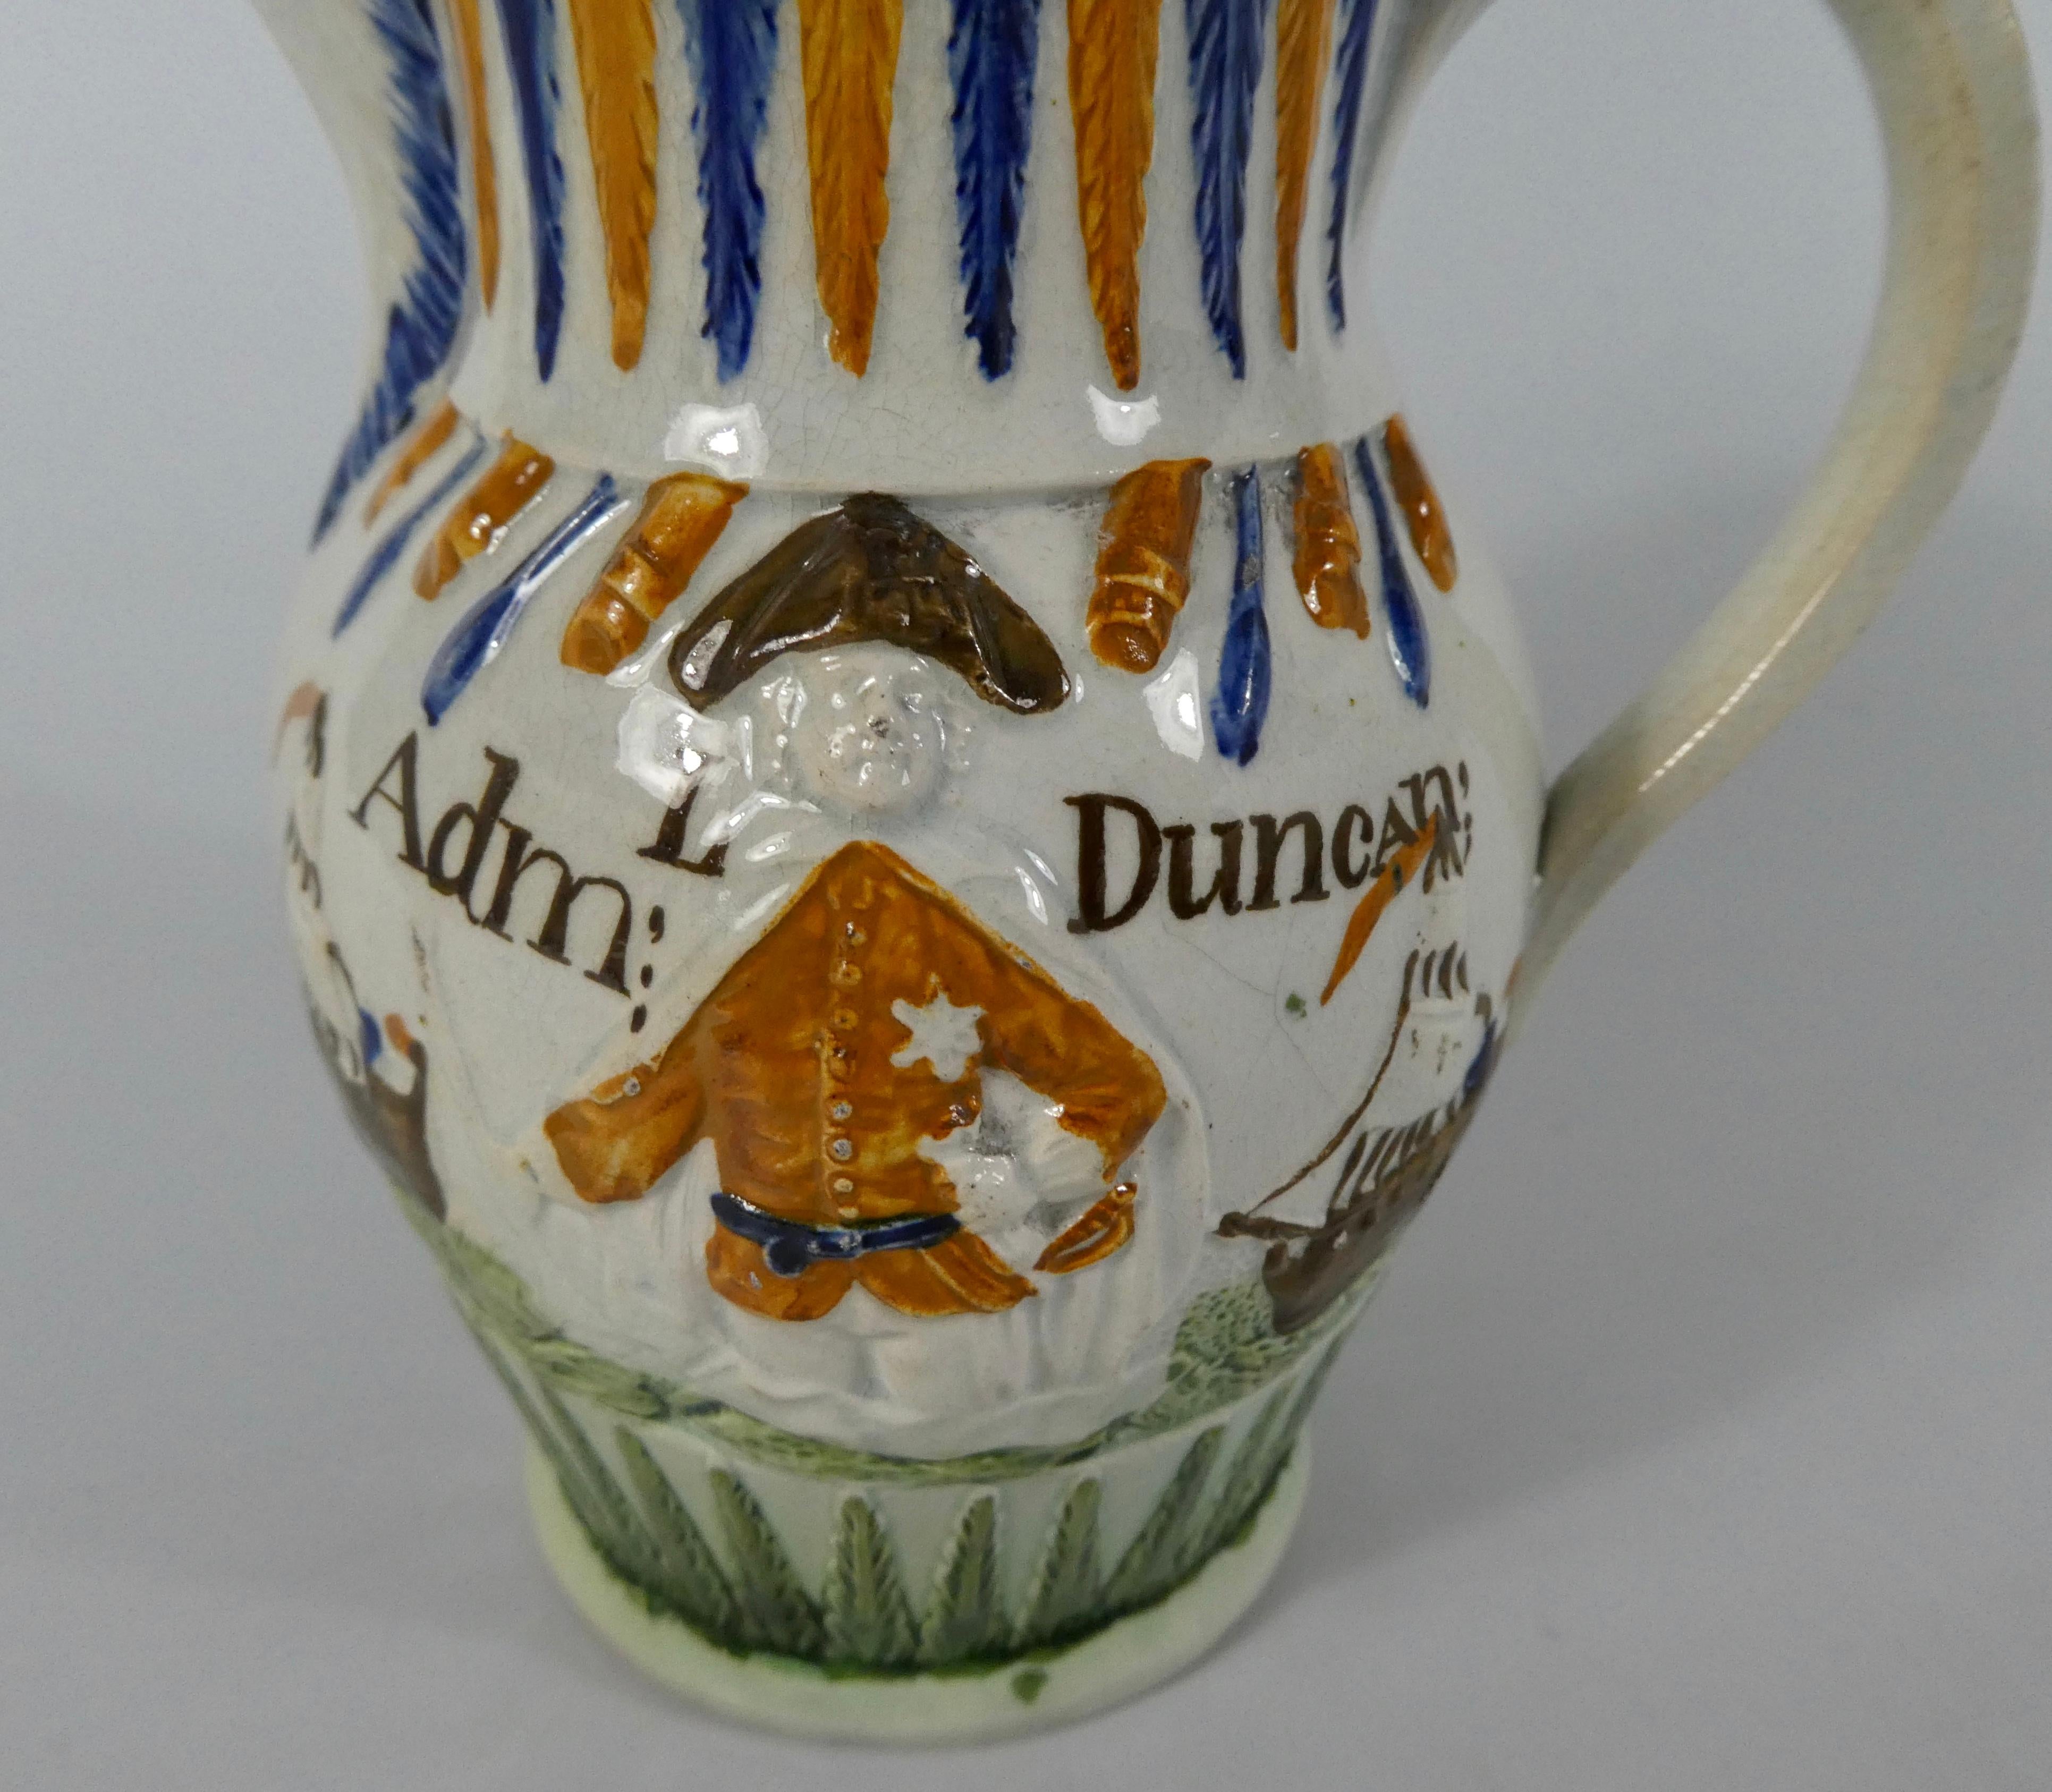 Staffordshire pottery ‘Prattware’ jug, circa 1798. Made to commemorate Admiral Duncan, and his role at the Battle of Camperdown. Moulded to both sides, with three quarter length portraits of Admiral Duncan above dolphins, and between ships. The base